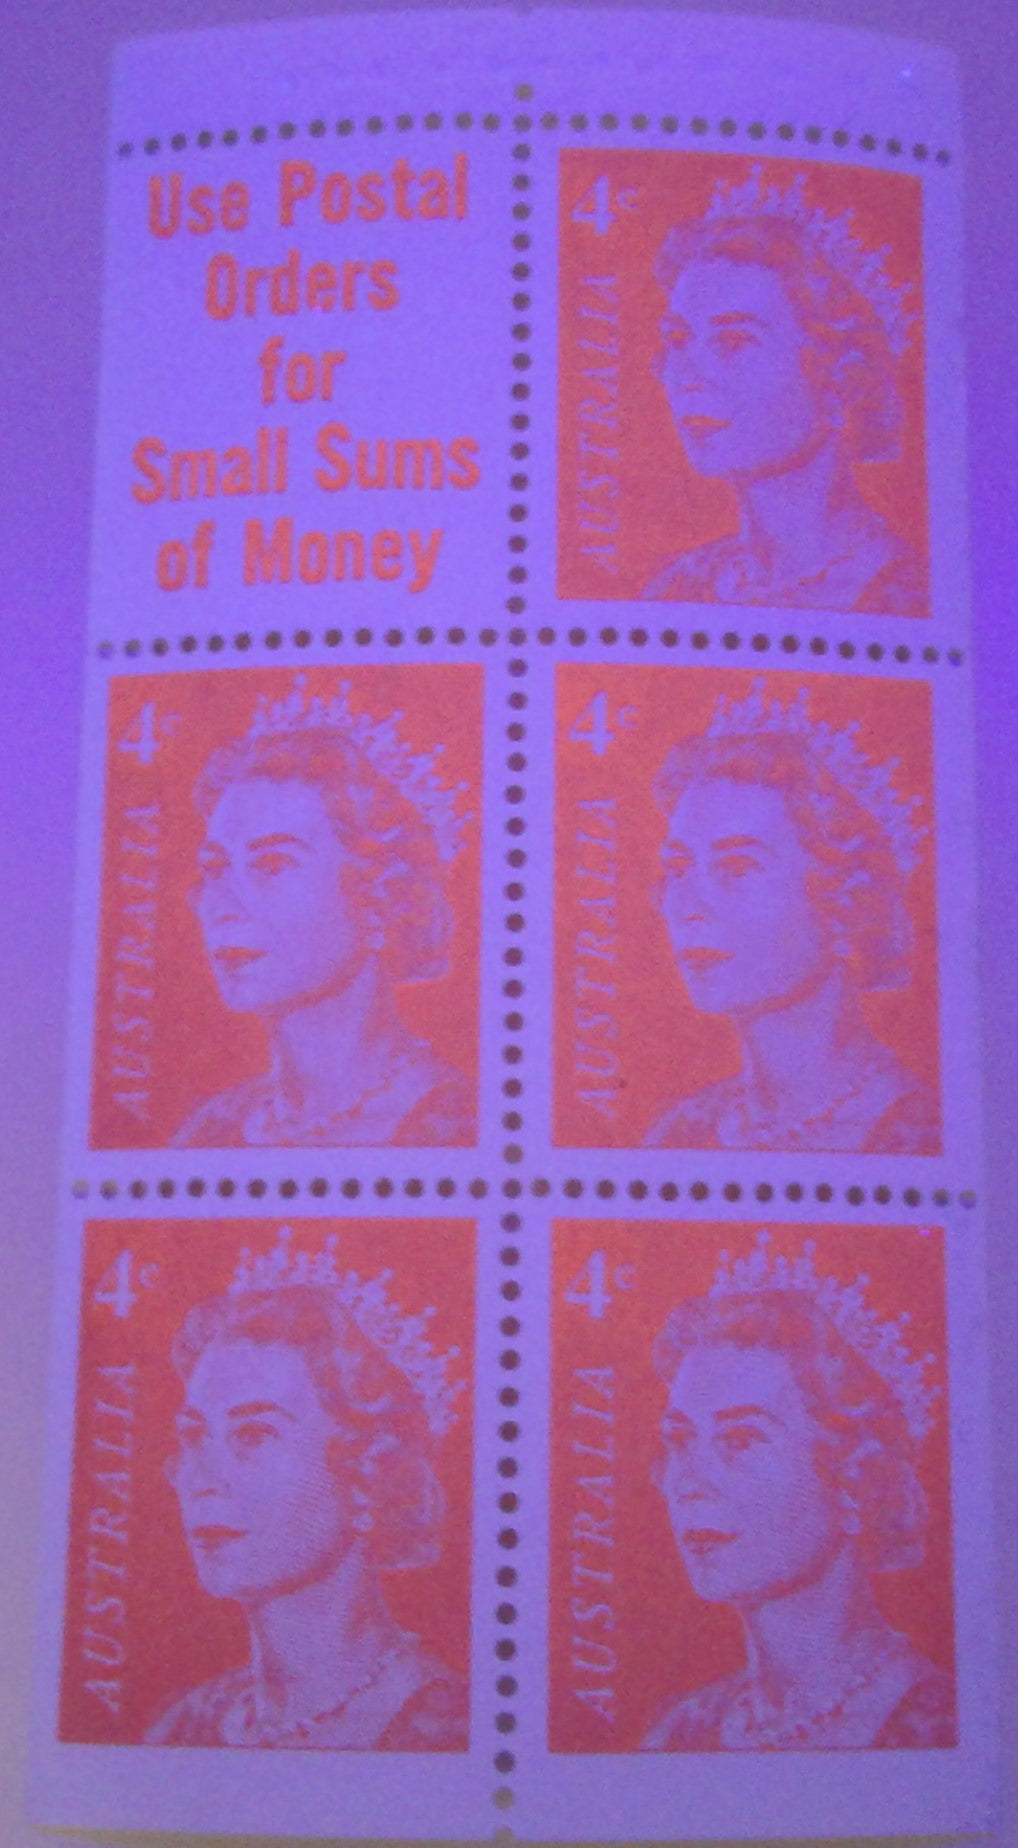 Australia #397a (SG#385a) 4c Orange Red Queen Elizabeth II 1966-1973 Decimal Definitive Issue, a Very Fine NH Booklet Pane of 5 + Label, Printed on Dead Paper in Helecon Ink